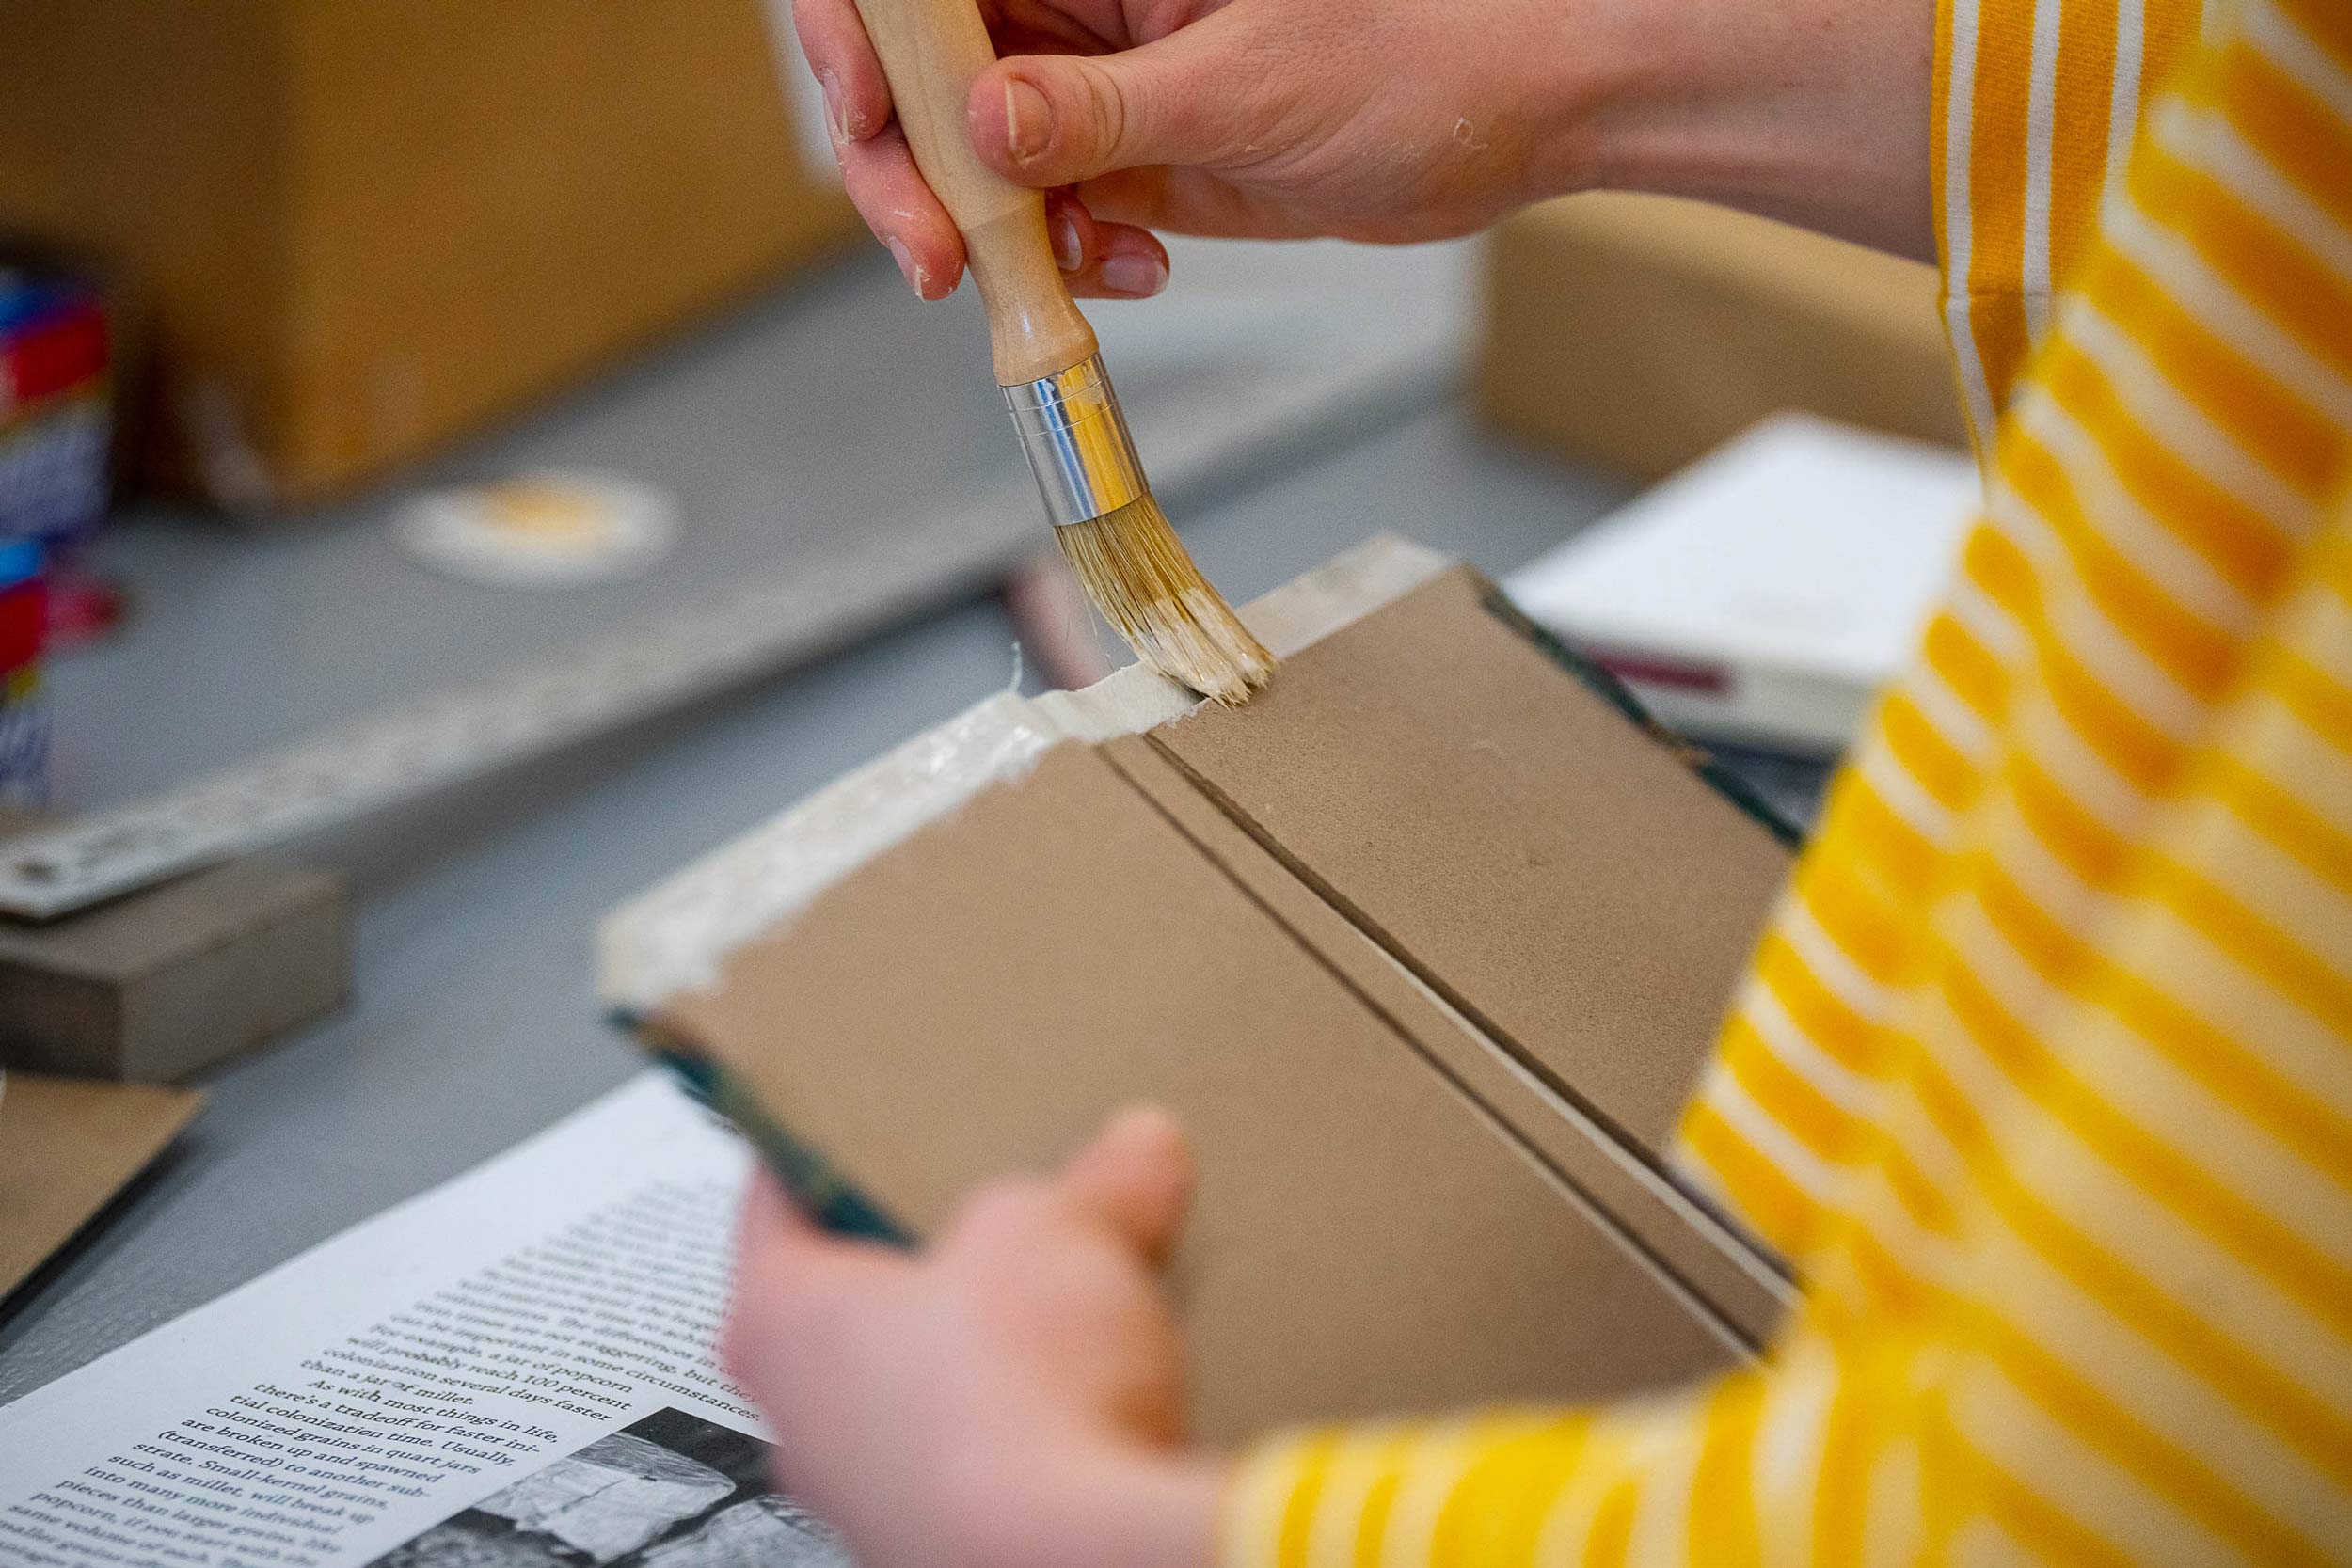 Close up of hands applying glue to a book binding